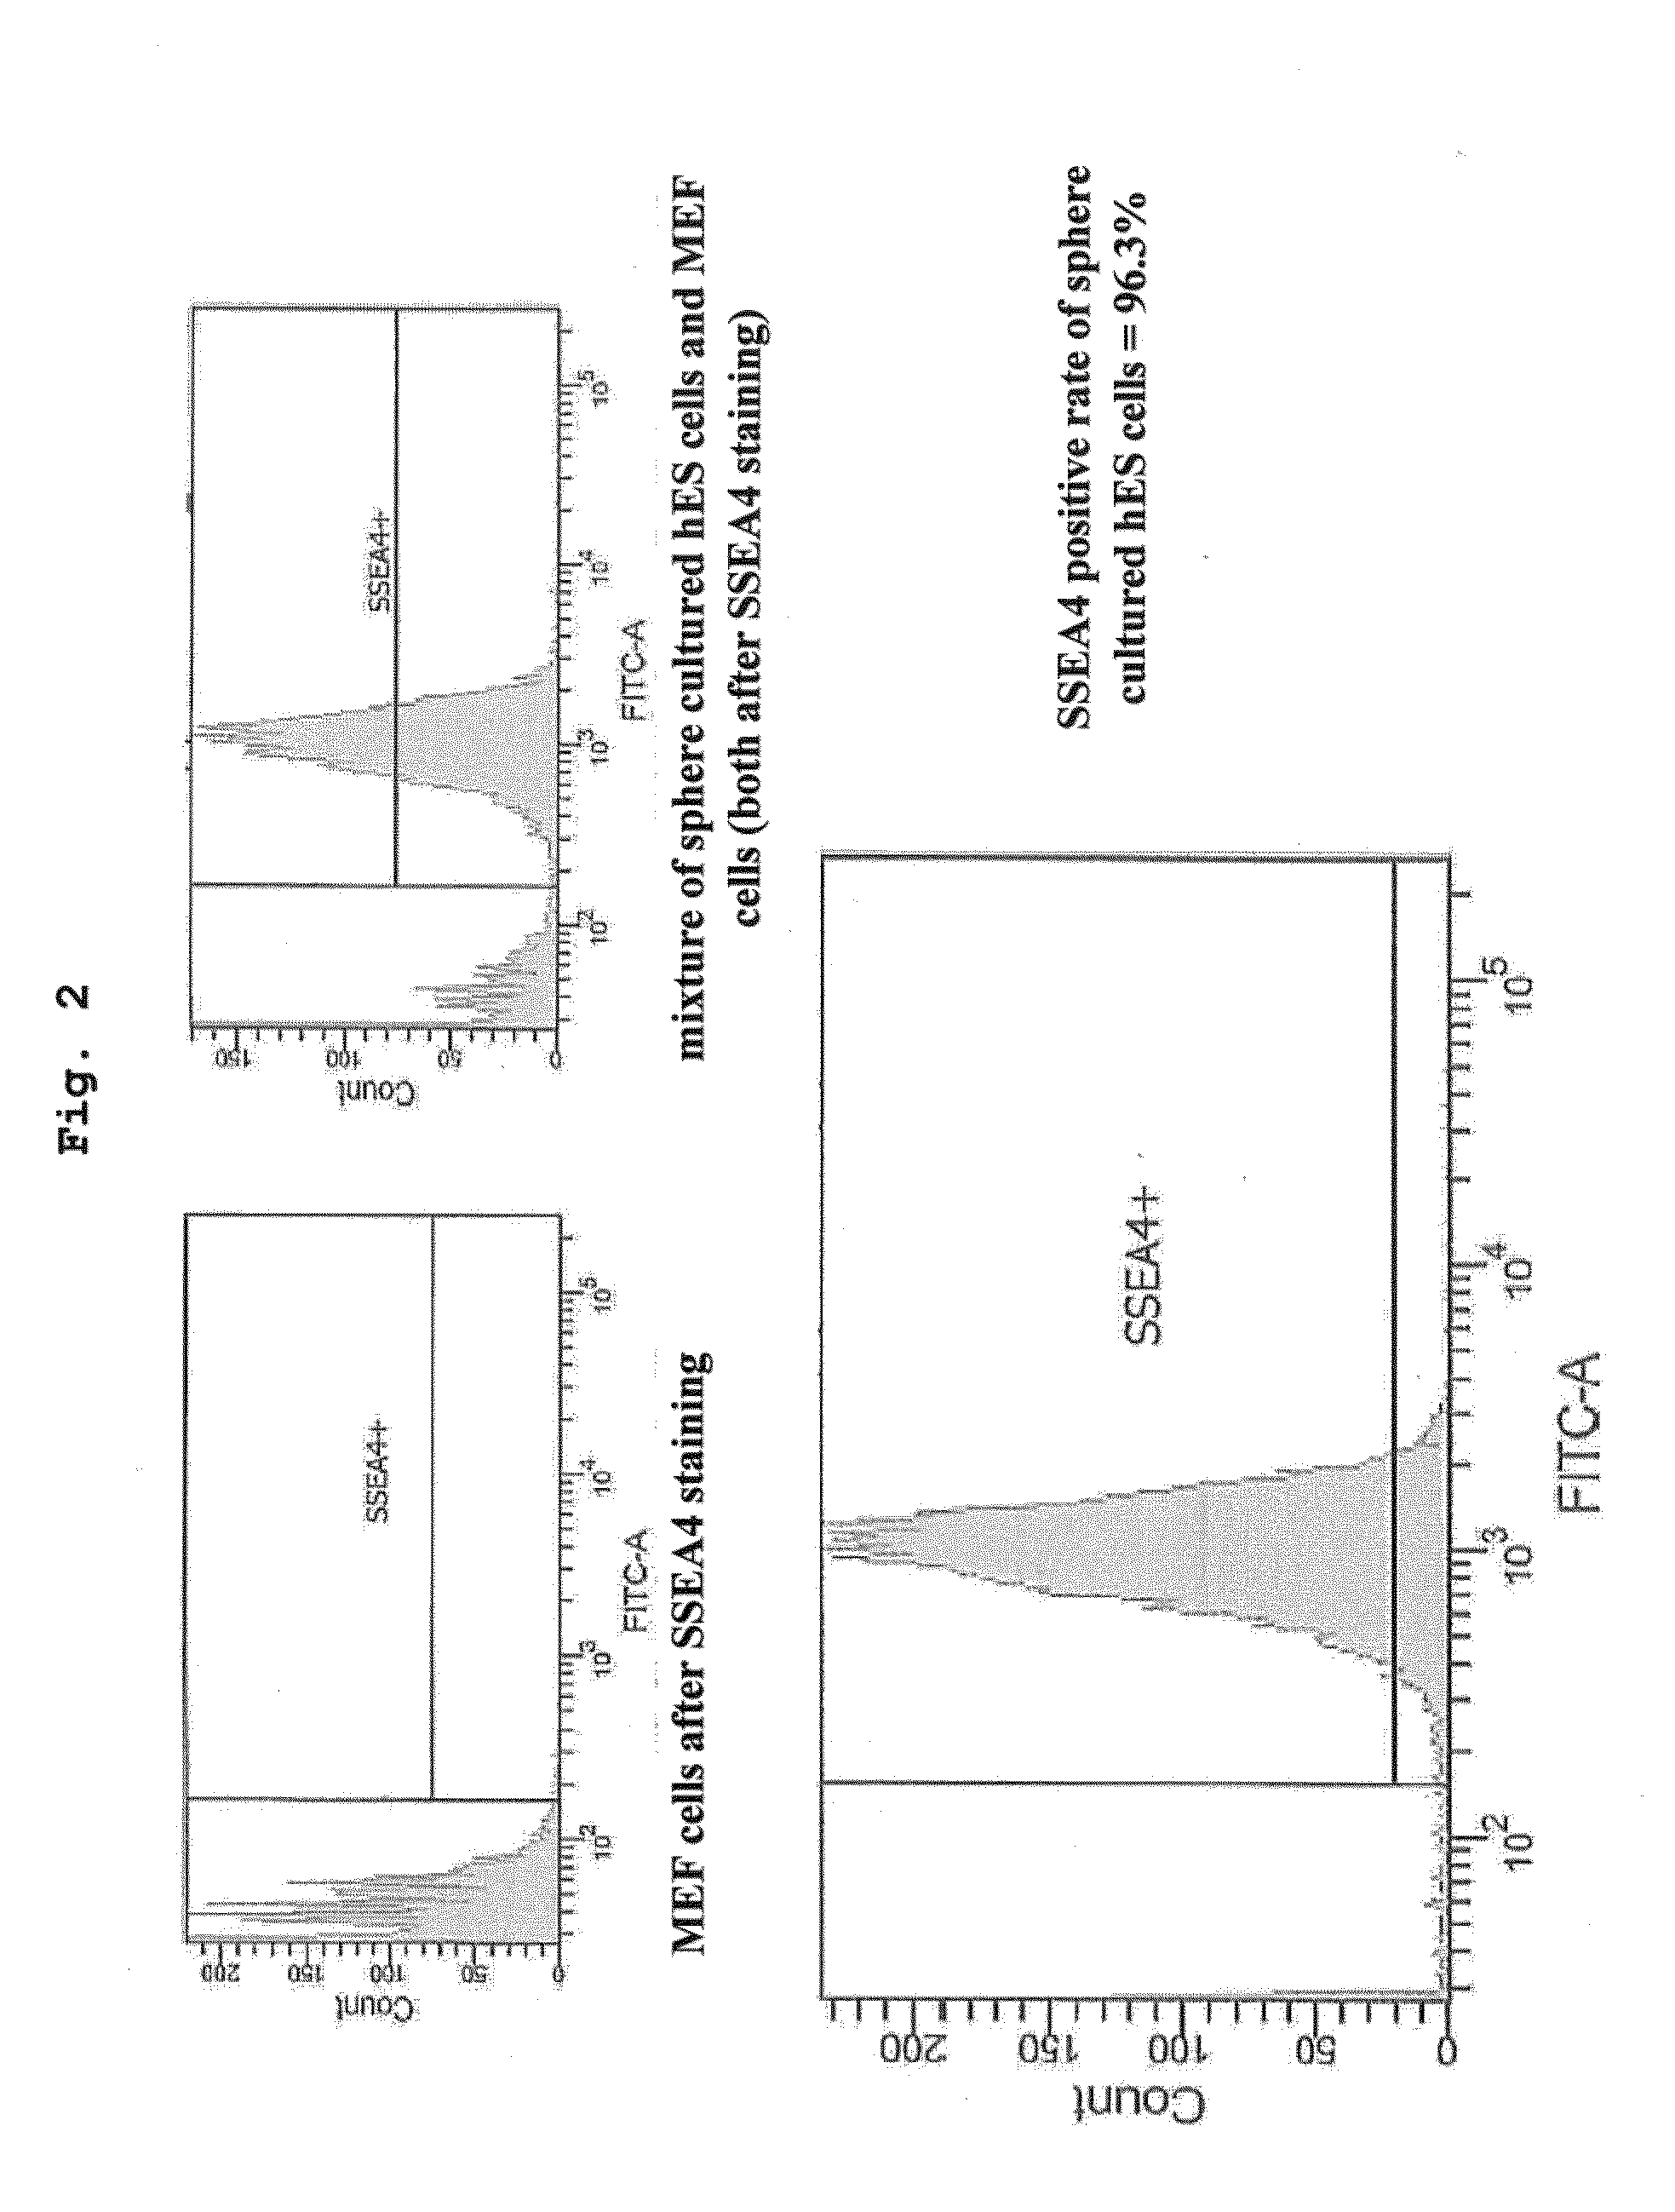 Method for culturing pluripotent stem cell